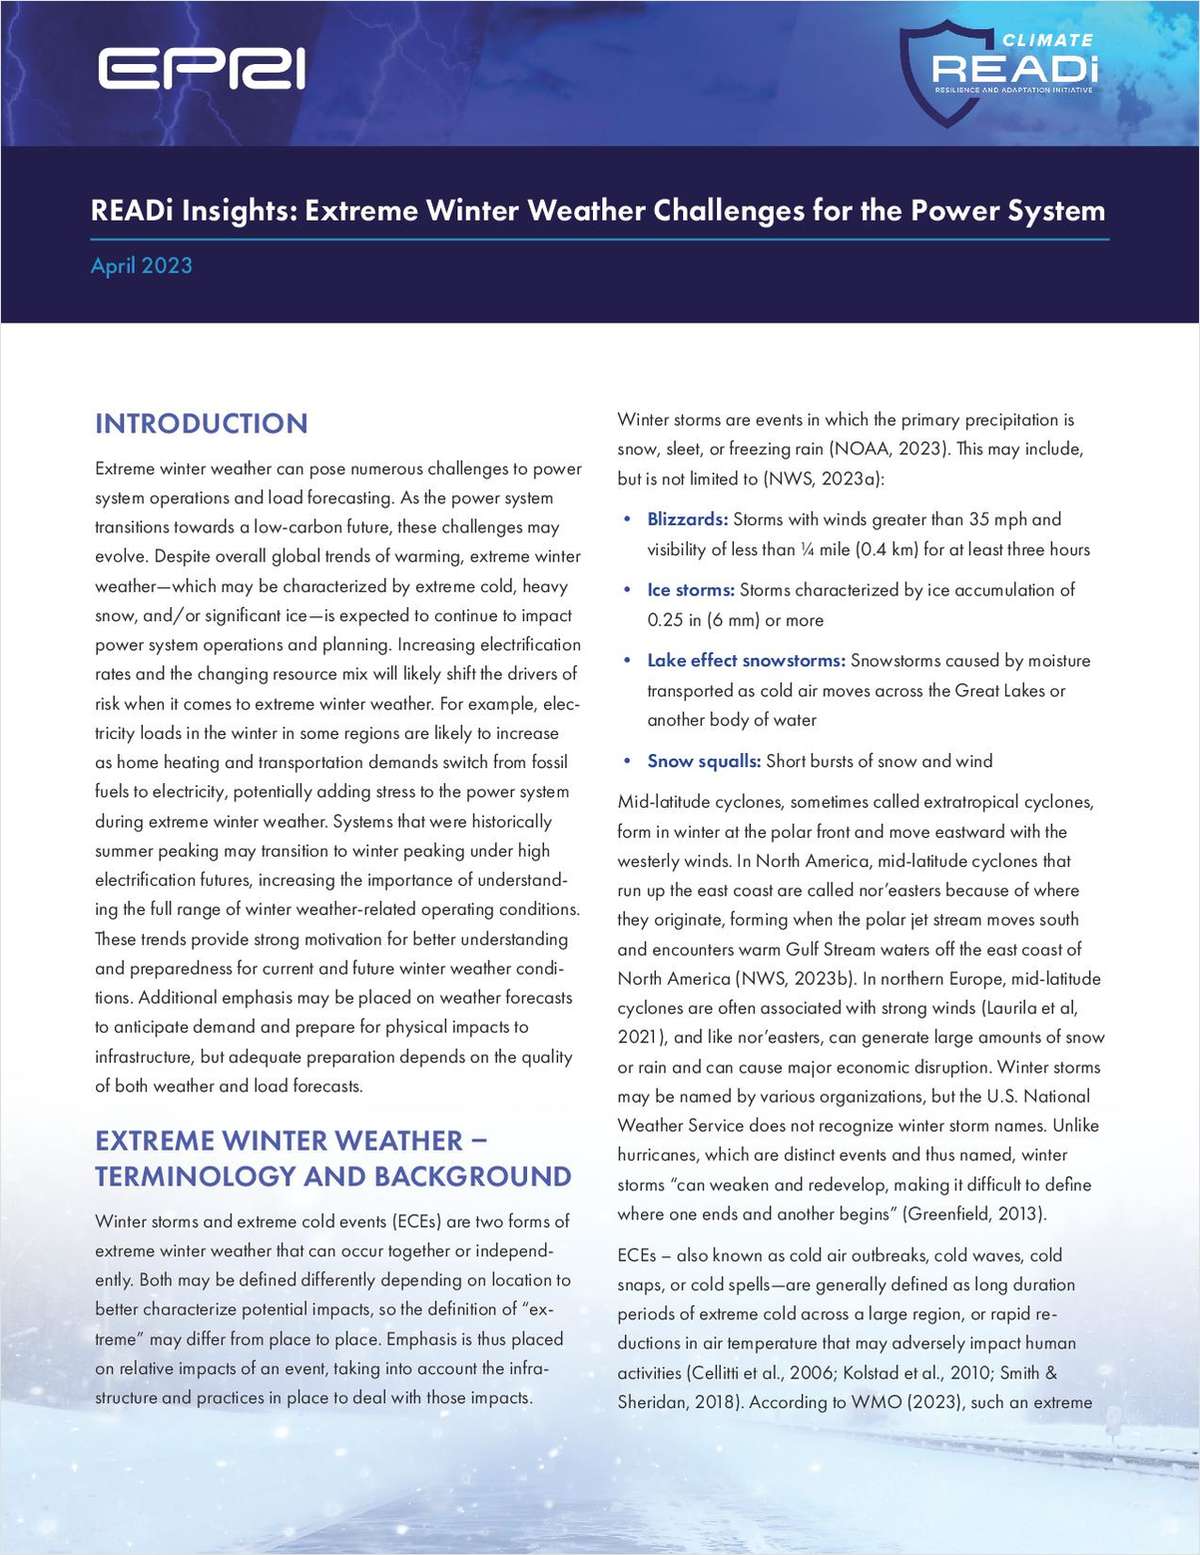 Extreme Winter Weather Challenges for the Power System